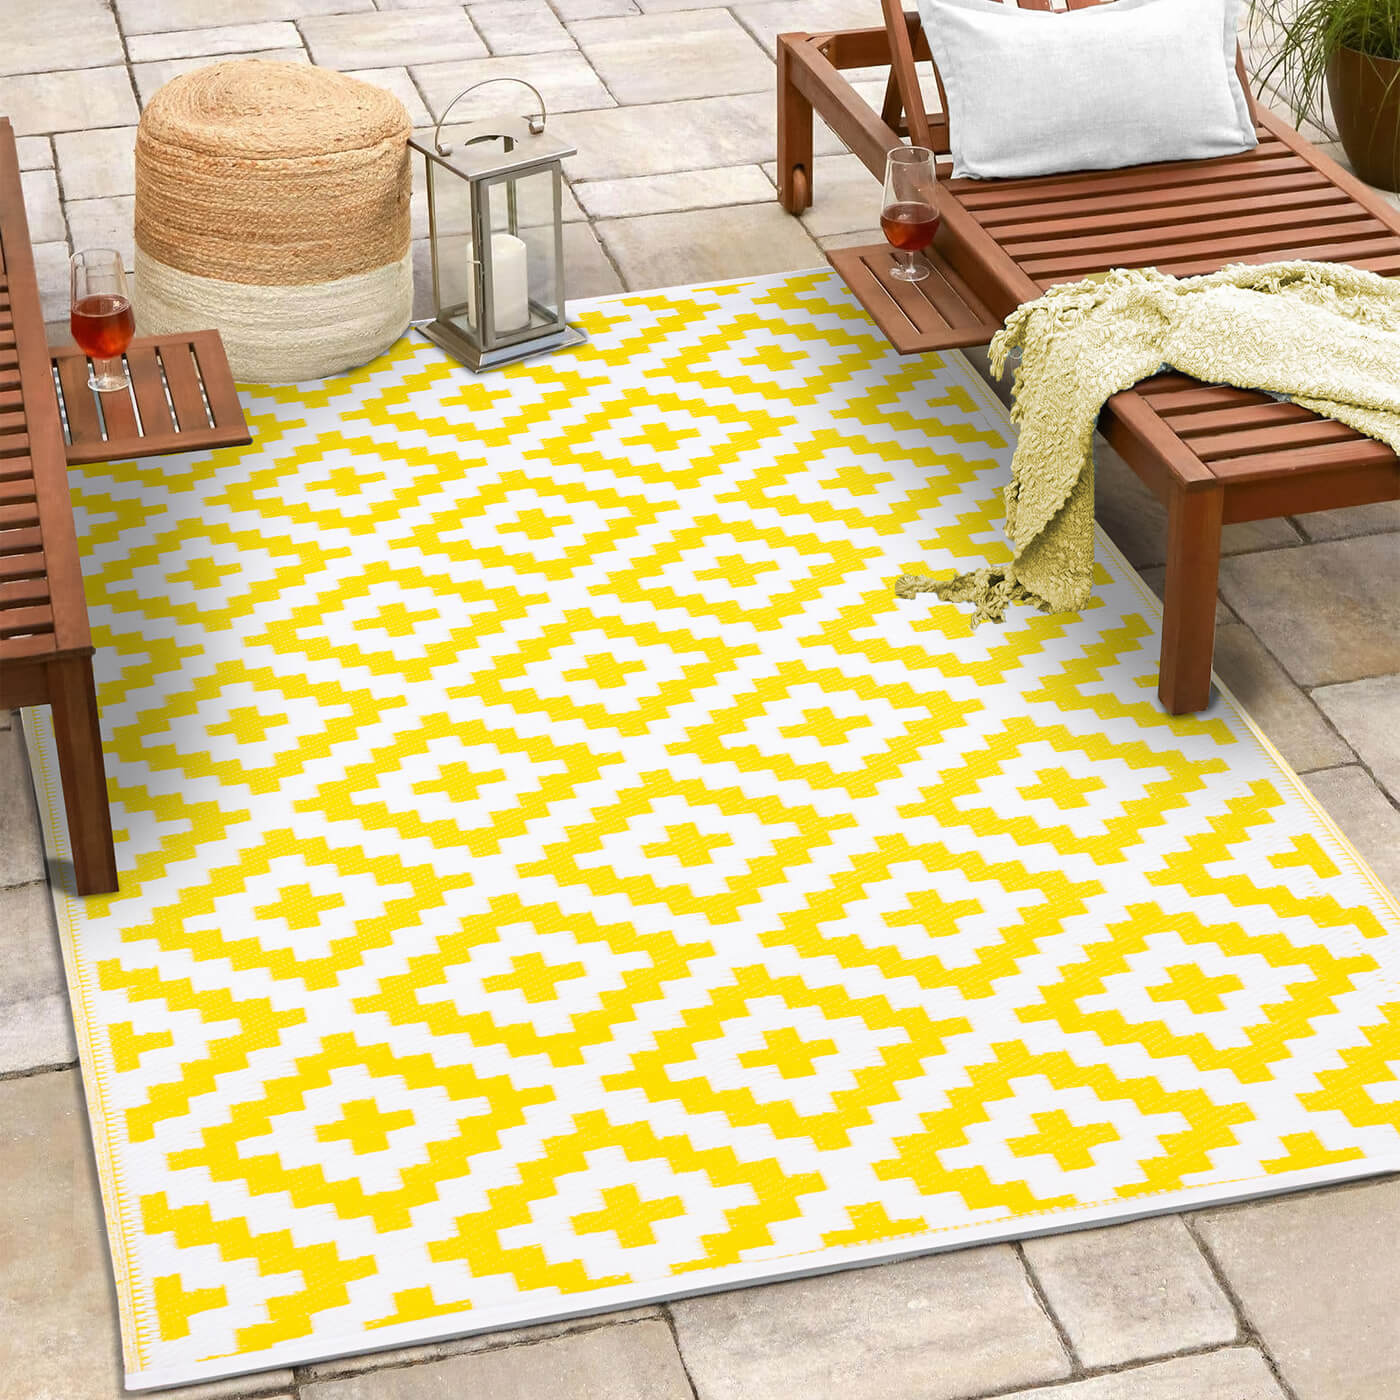 Nirvana Outdoor Recycled Plastic Rug (Yellow/White)